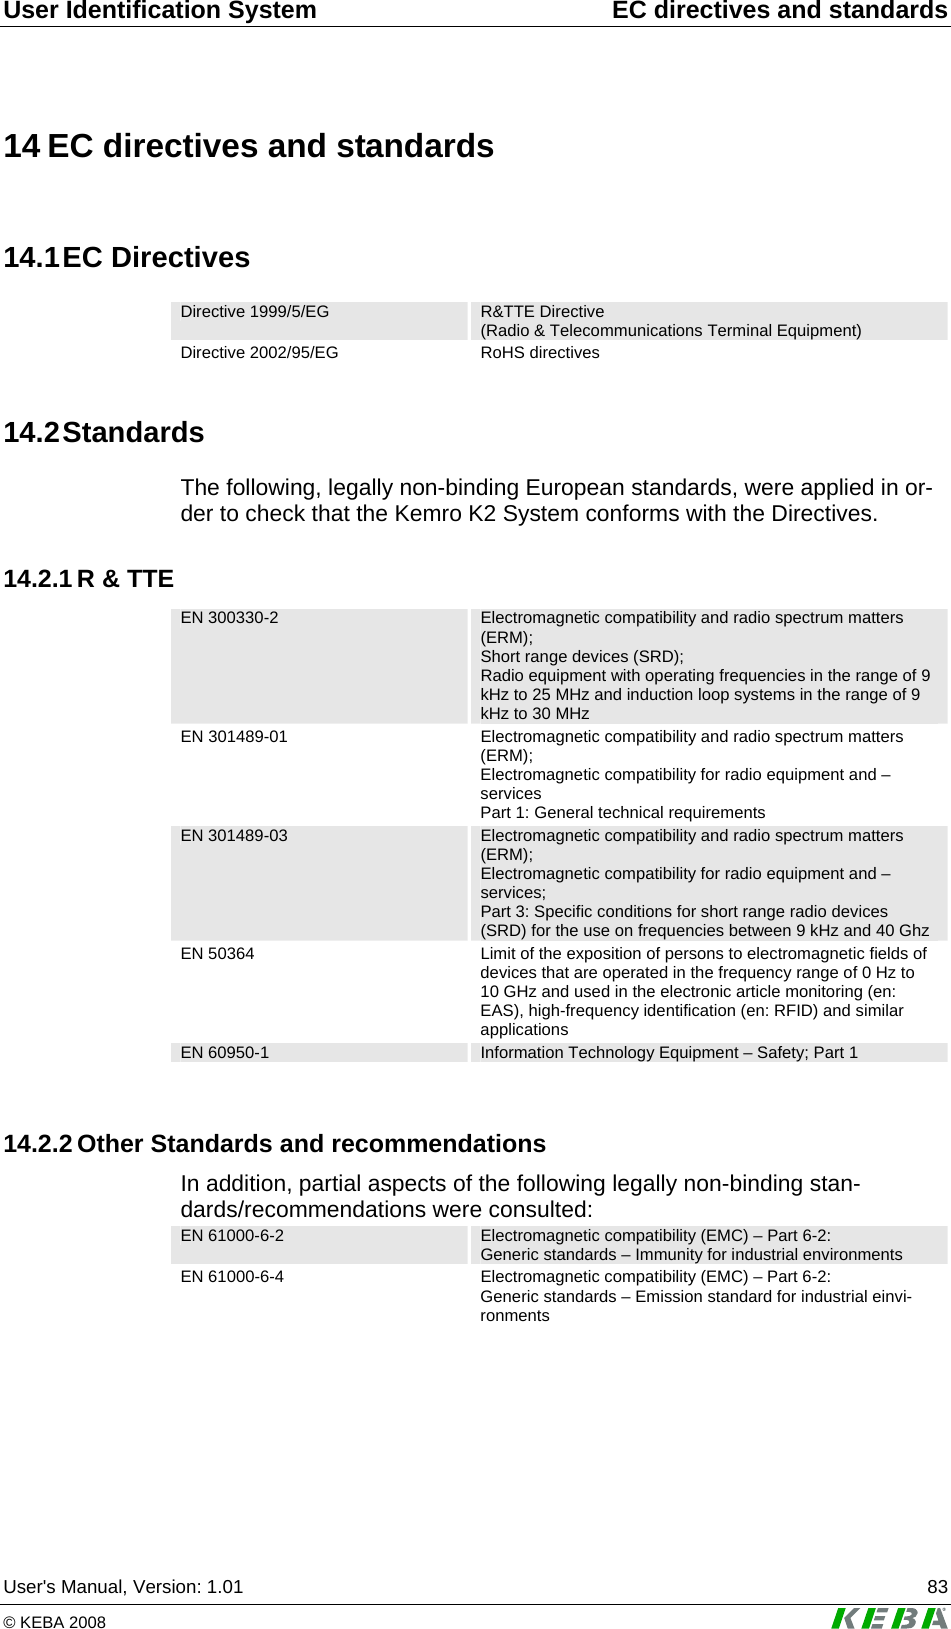 User Identification System  EC directives and standards User&apos;s Manual, Version: 1.01  83 © KEBA 2008   14 EC directives and standards 14.1 EC  Directives Directive 1999/5/EG  R&amp;TTE Directive (Radio &amp; Telecommunications Terminal Equipment) Directive 2002/95/EG  RoHS directives 14.2 Standards The following, legally non-binding European standards, were applied in or-der to check that the Kemro K2 System conforms with the Directives. 14.2.1 R &amp; TTE EN 300330-2  Electromagnetic compatibility and radio spectrum matters (ERM); Short range devices (SRD); Radio equipment with operating frequencies in the range of 9 kHz to 25 MHz and induction loop systems in the range of 9 kHz to 30 MHz EN 301489-01  Electromagnetic compatibility and radio spectrum matters (ERM); Electromagnetic compatibility for radio equipment and –services Part 1: General technical requirements EN 301489-03  Electromagnetic compatibility and radio spectrum matters (ERM); Electromagnetic compatibility for radio equipment and –services; Part 3: Specific conditions for short range radio devices (SRD) for the use on frequencies between 9 kHz and 40 Ghz EN 50364  Limit of the exposition of persons to electromagnetic fields of devices that are operated in the frequency range of 0 Hz to 10 GHz and used in the electronic article monitoring (en: EAS), high-frequency identification (en: RFID) and similar applications EN 60950-1  Information Technology Equipment – Safety; Part 1  14.2.2 Other Standards and recommendations In addition, partial aspects of the following legally non-binding stan-dards/recommendations were consulted: EN 61000-6-2  Electromagnetic compatibility (EMC) – Part 6-2: Generic standards – Immunity for industrial environments EN 61000-6-4  Electromagnetic compatibility (EMC) – Part 6-2: Generic standards – Emission standard for industrial einvi-ronments  